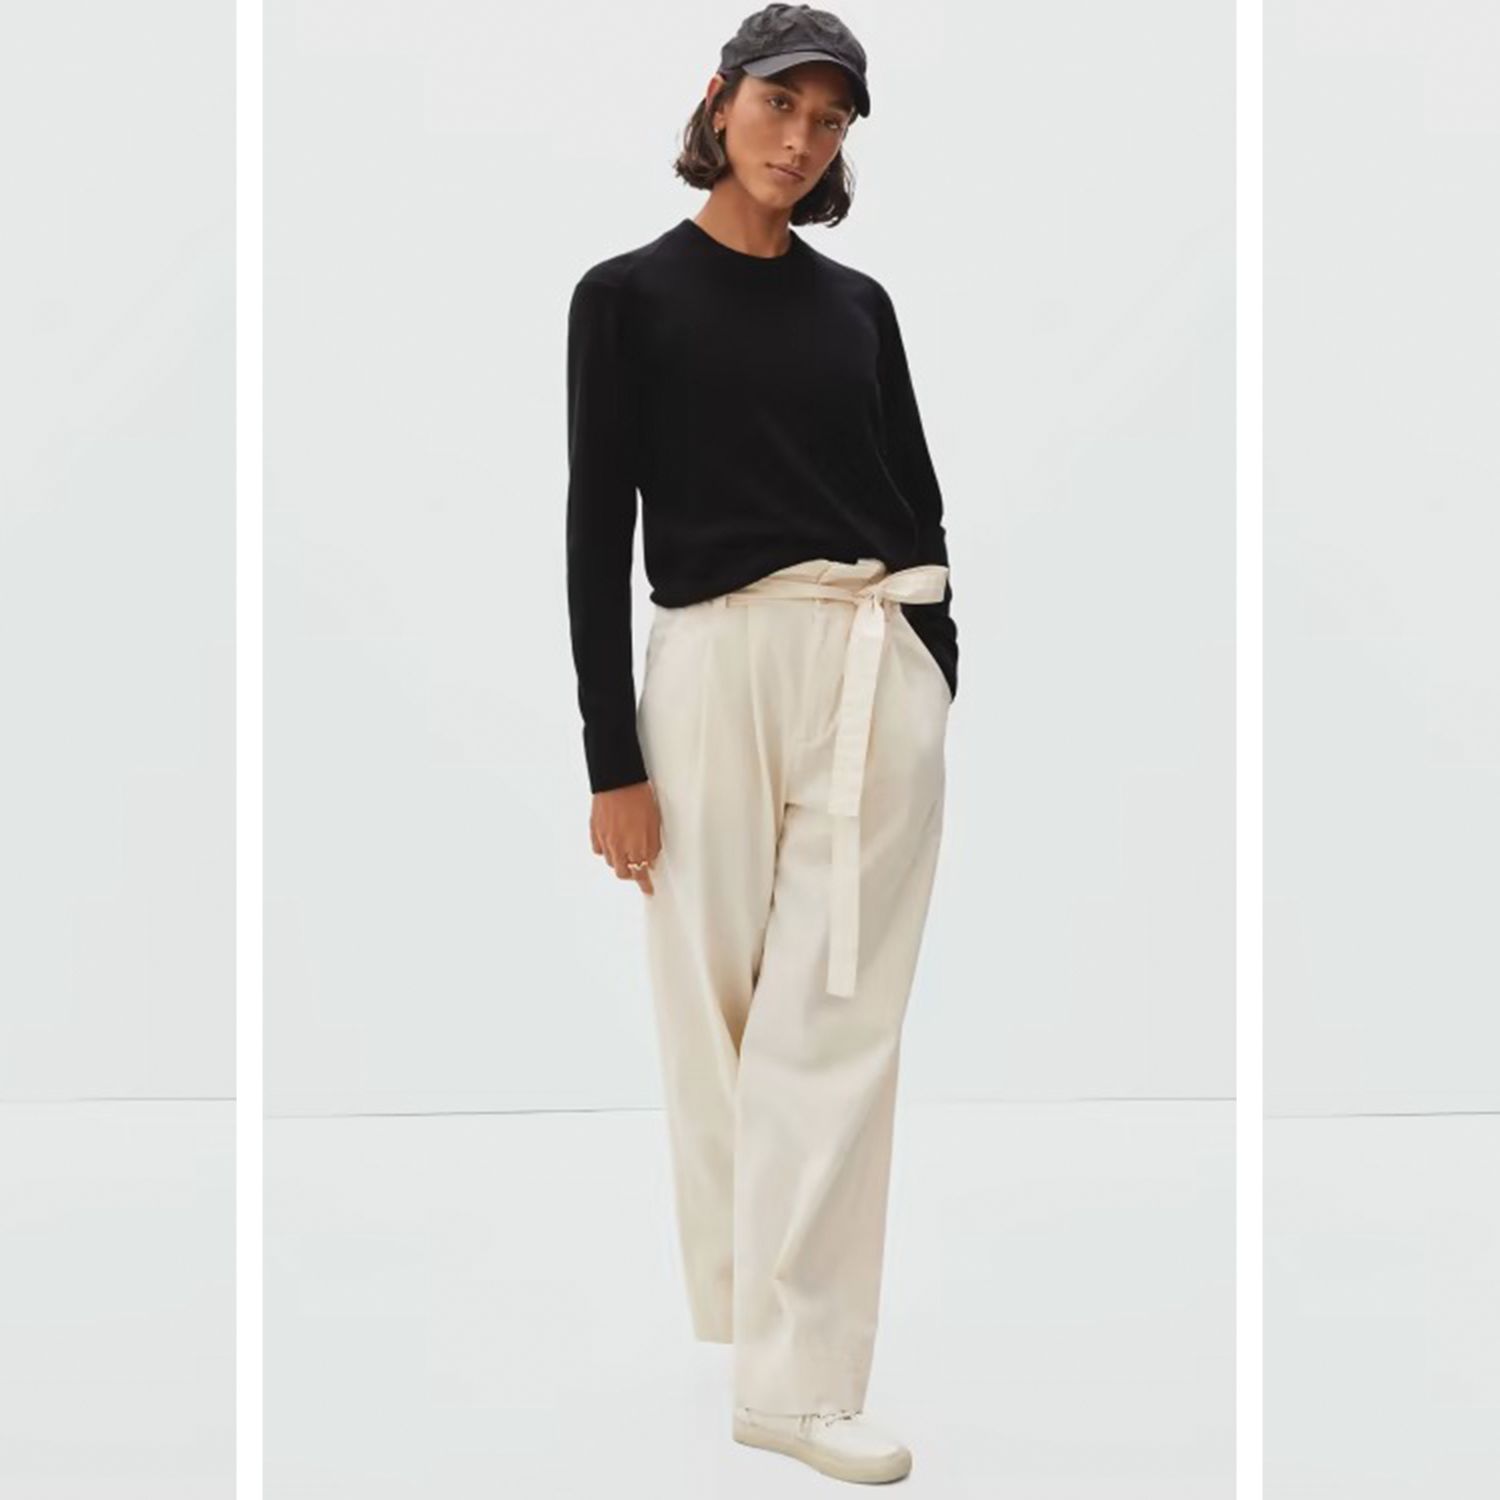 An Editor's Two Favorite Work Staples Are on Sale at Everlane